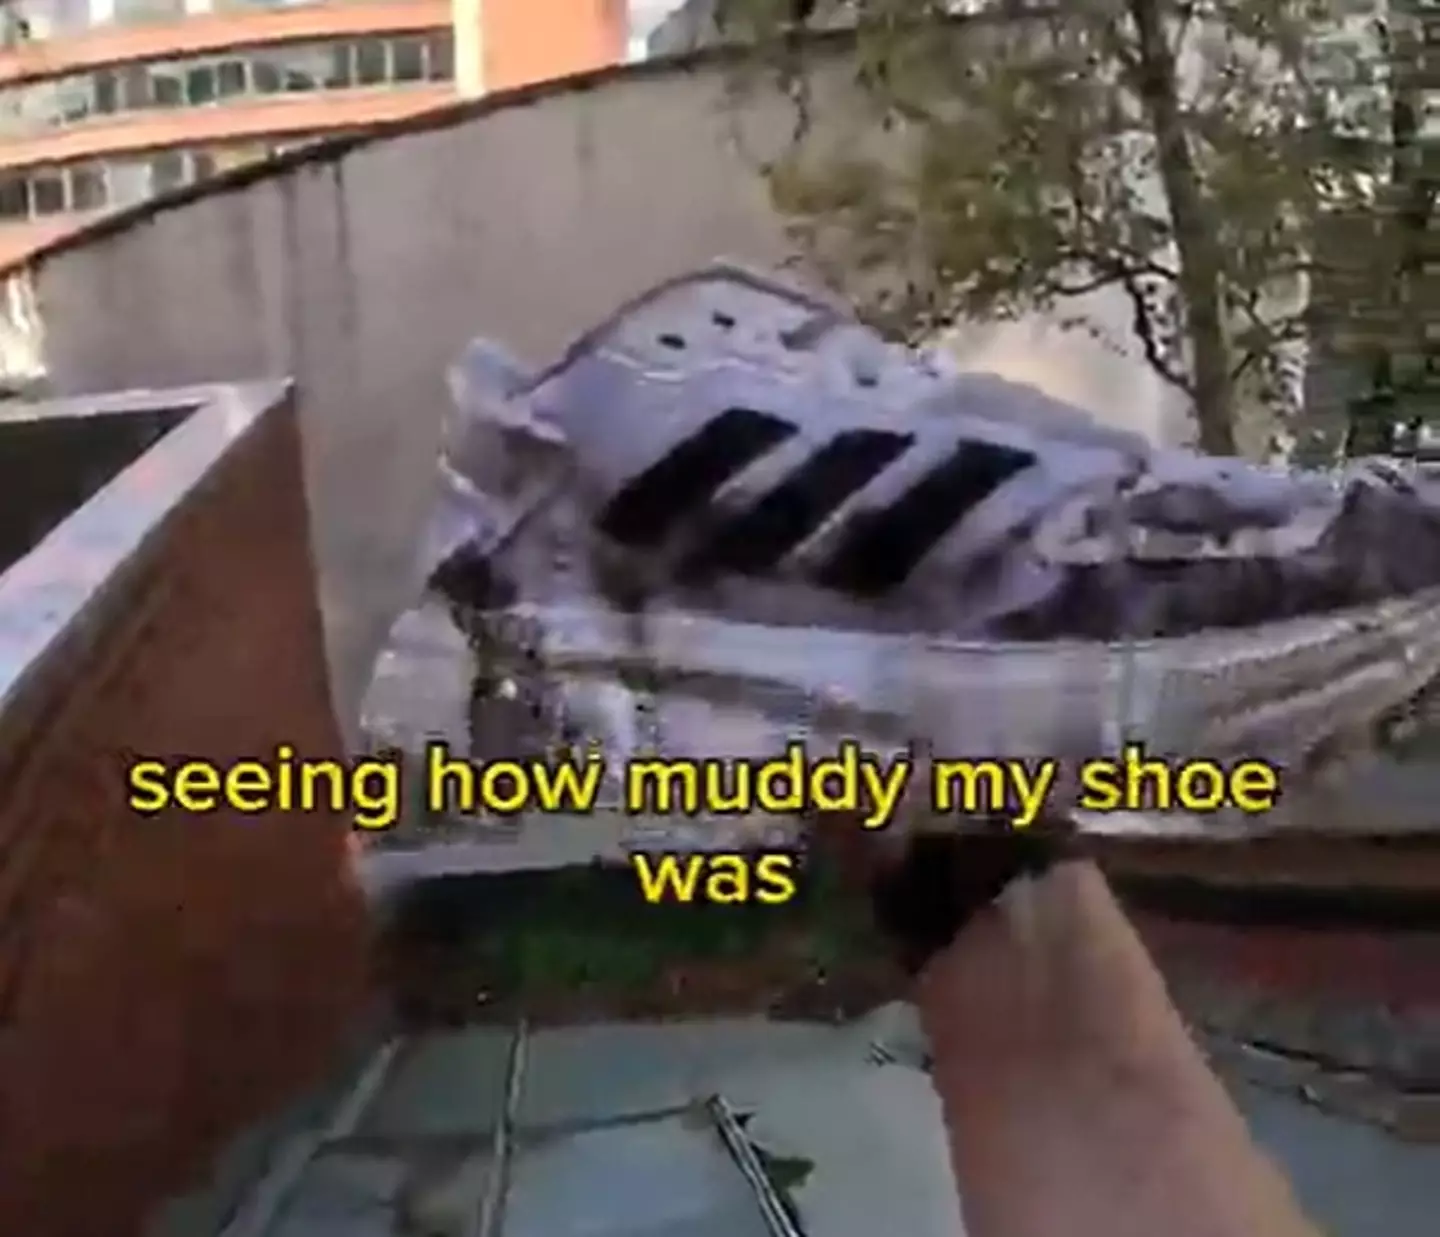 He immediately knew he'd made the wrong decision as his shoes got covered in mud.